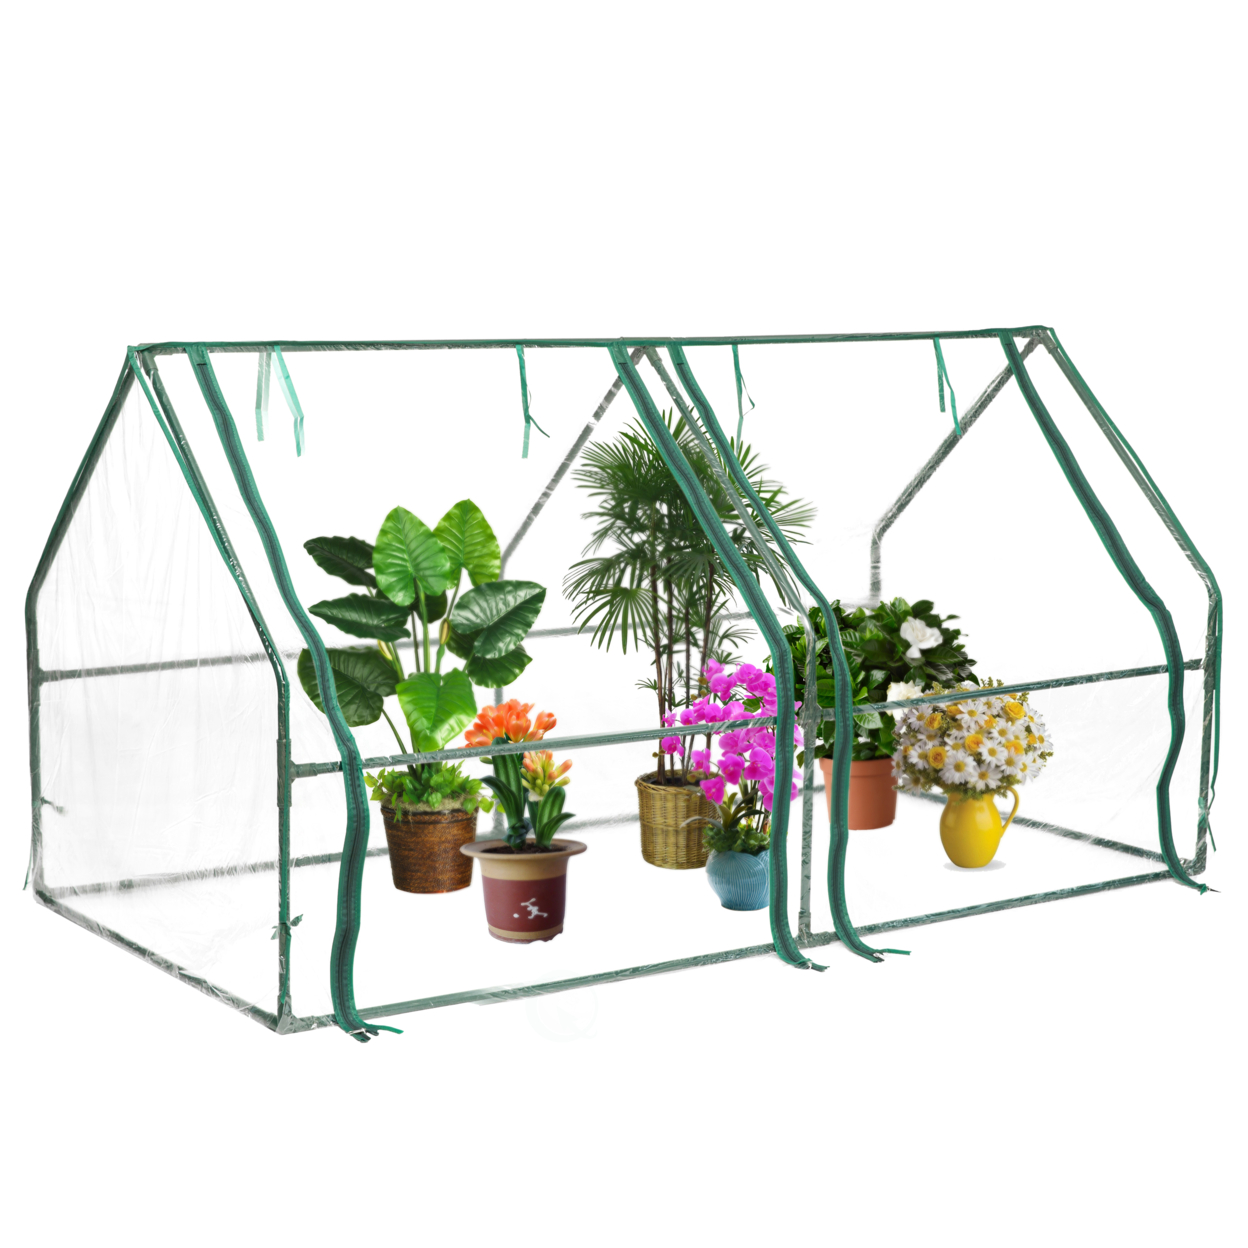 Green Outdoor Waterproof Portable Plant Greenhouse With 2 Clear Zippered Windows - Medium